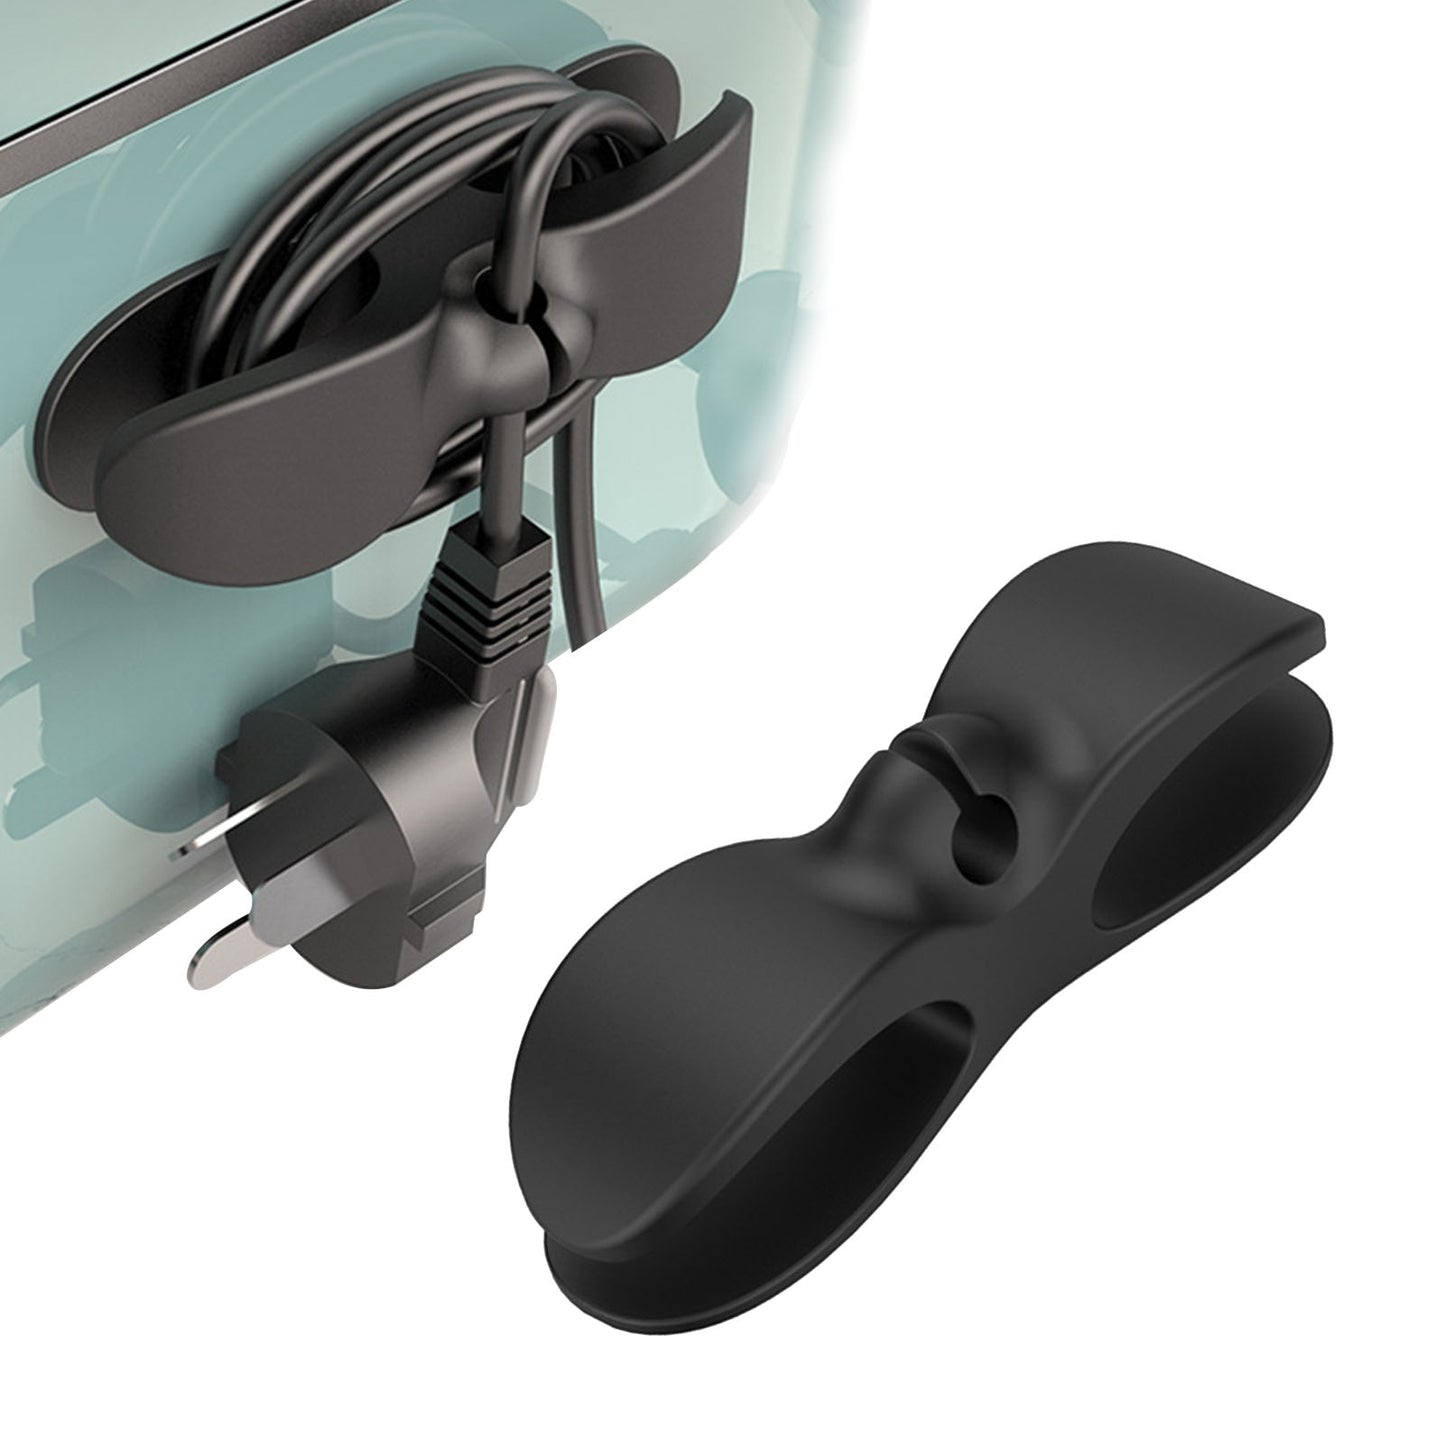 Cord Holders For Appliances